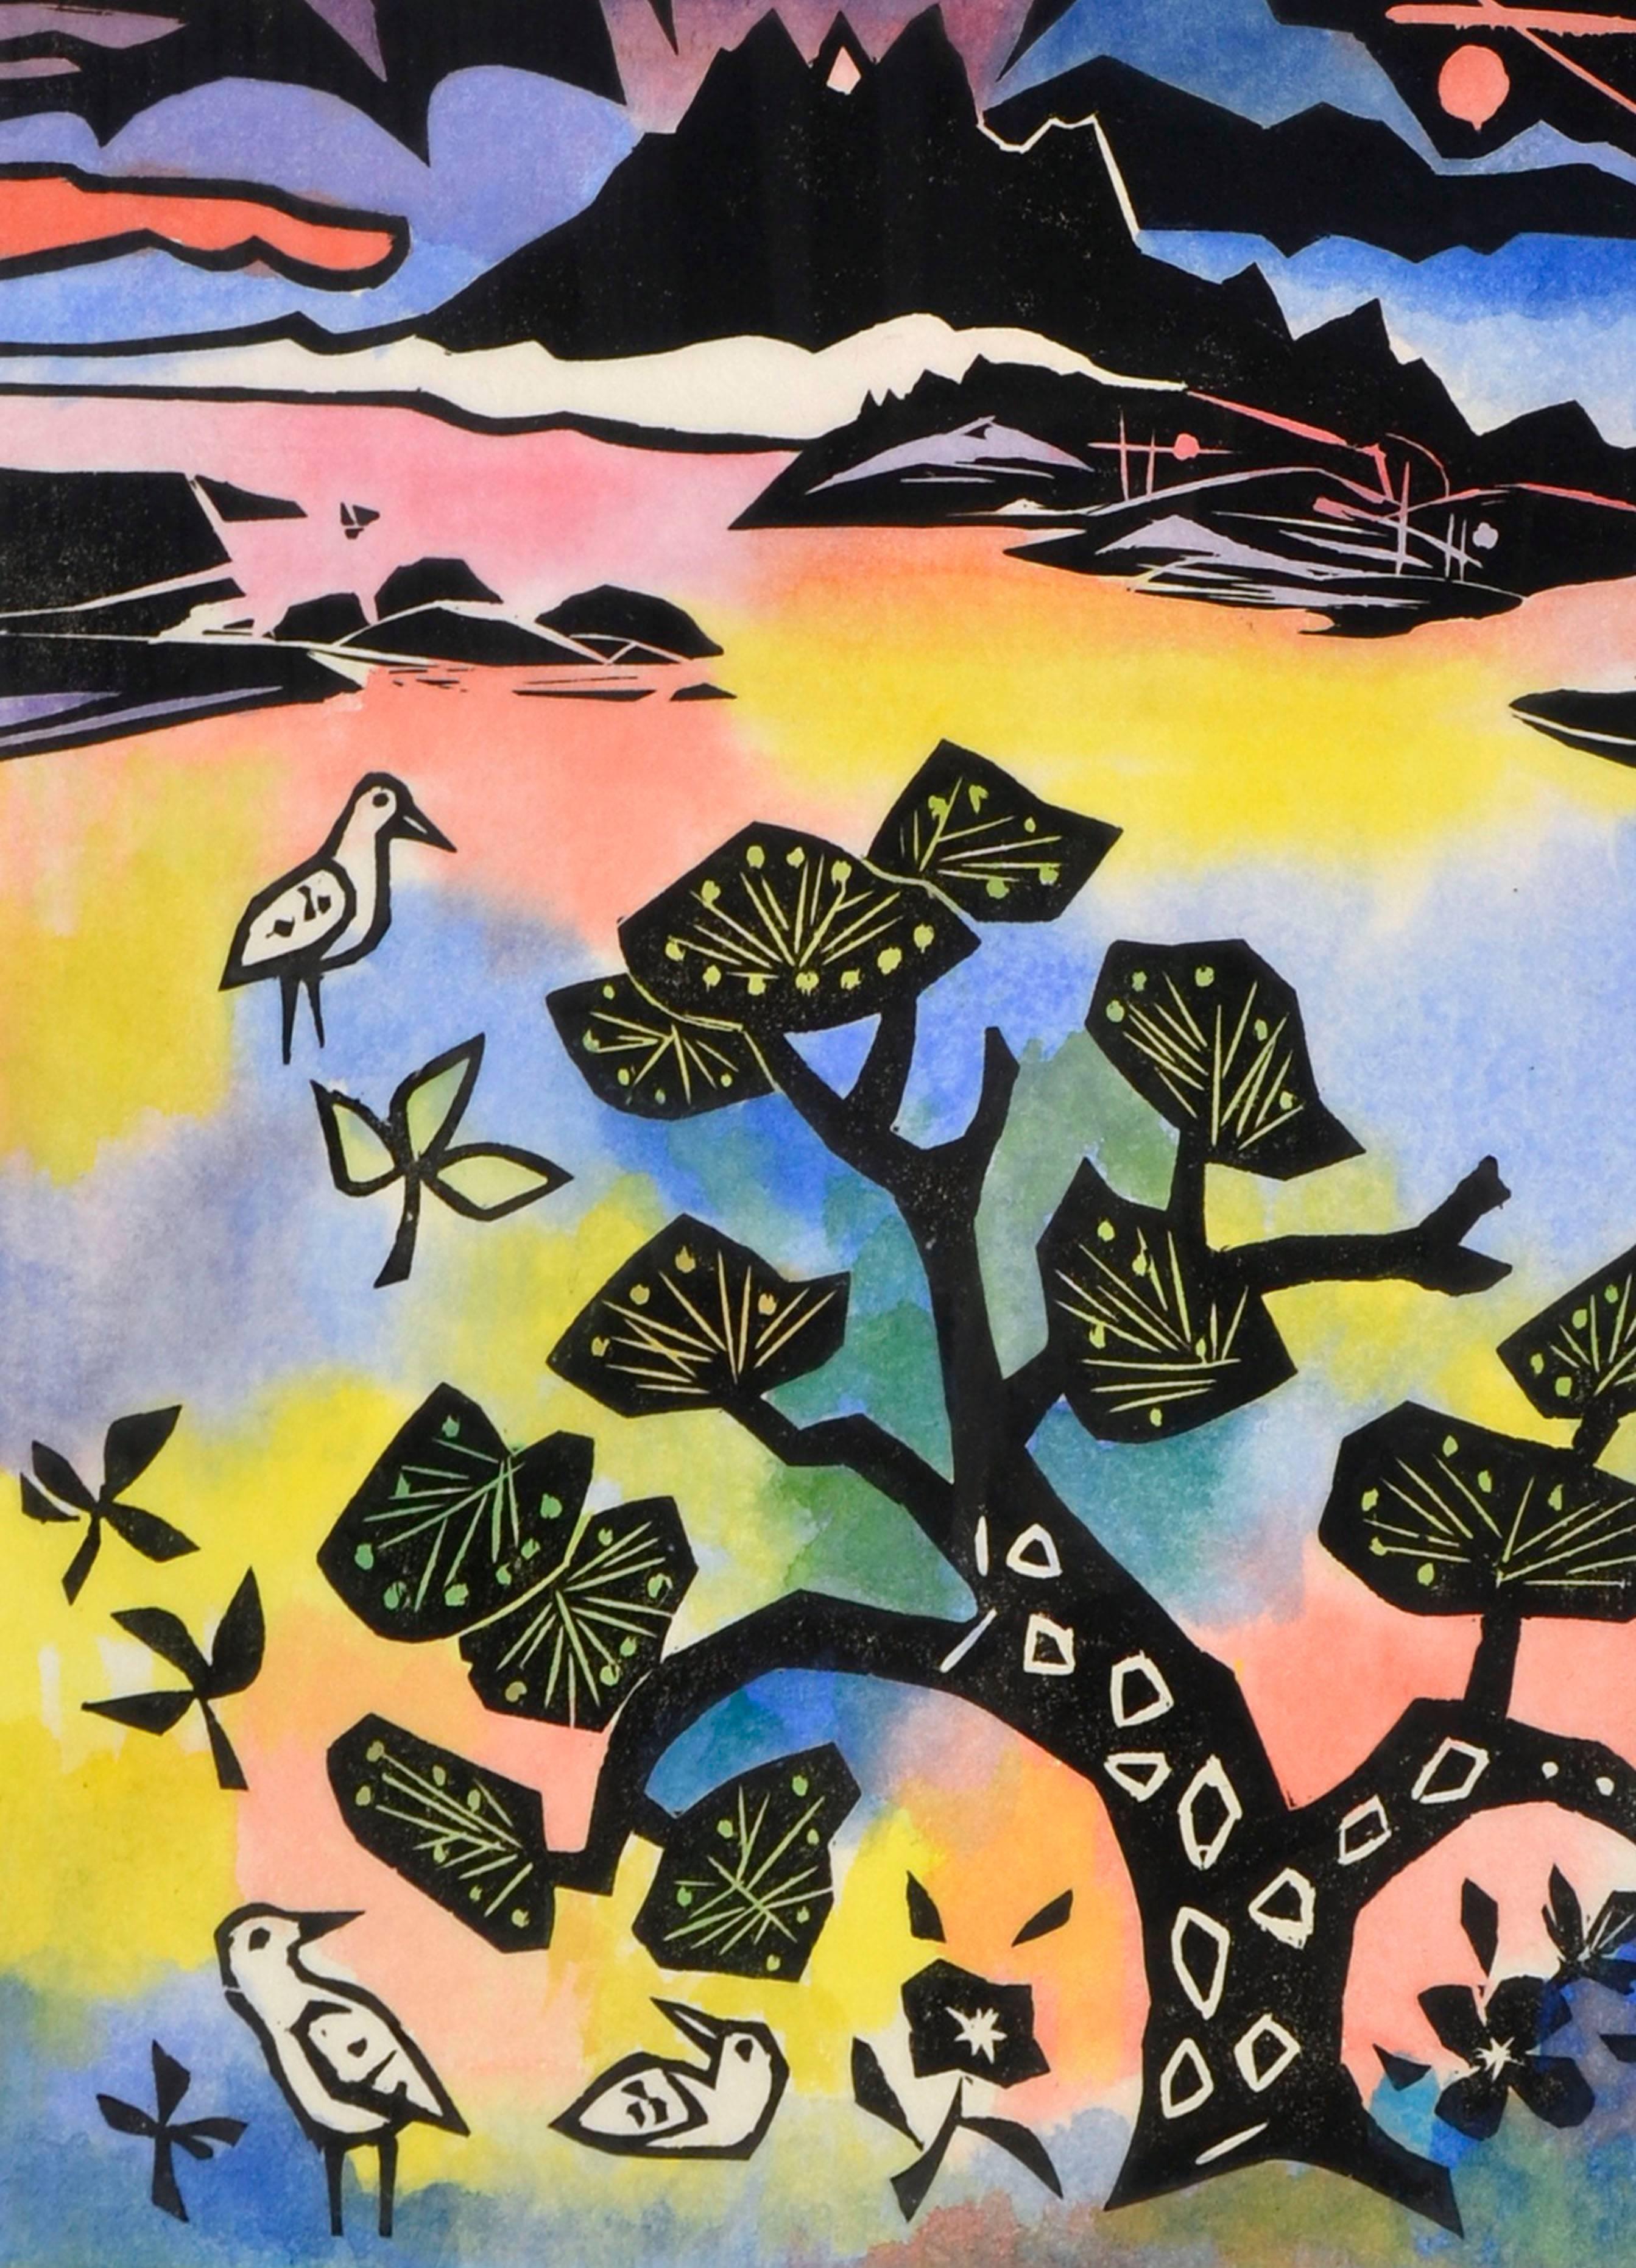 Oriental Landscape with Birds - Abstract Expressionist Painting by Ralph Edward Joosten